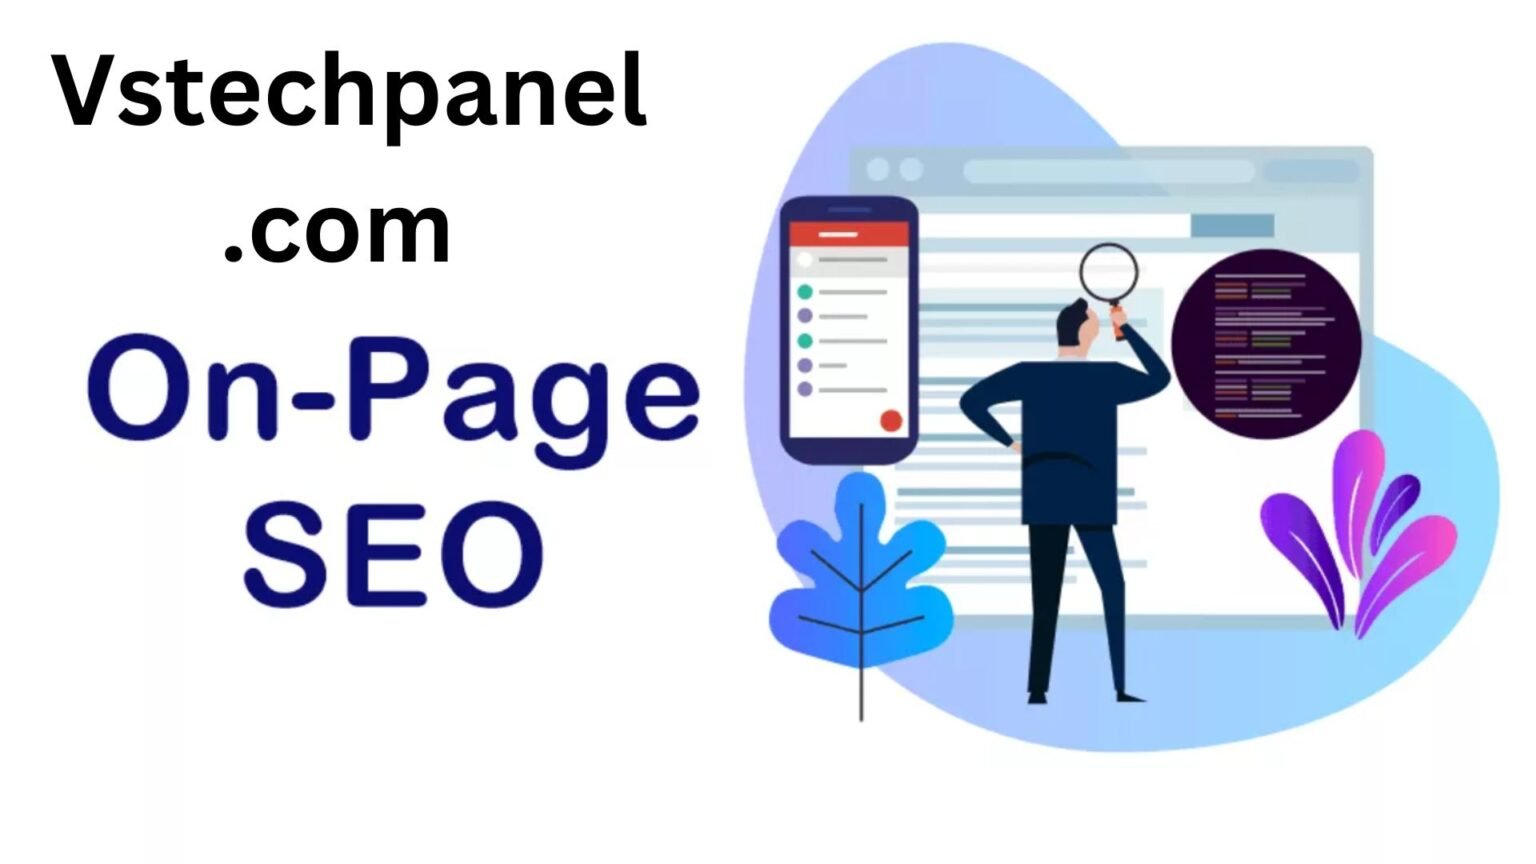 Vstechpanel.com Free Off-Page SEO